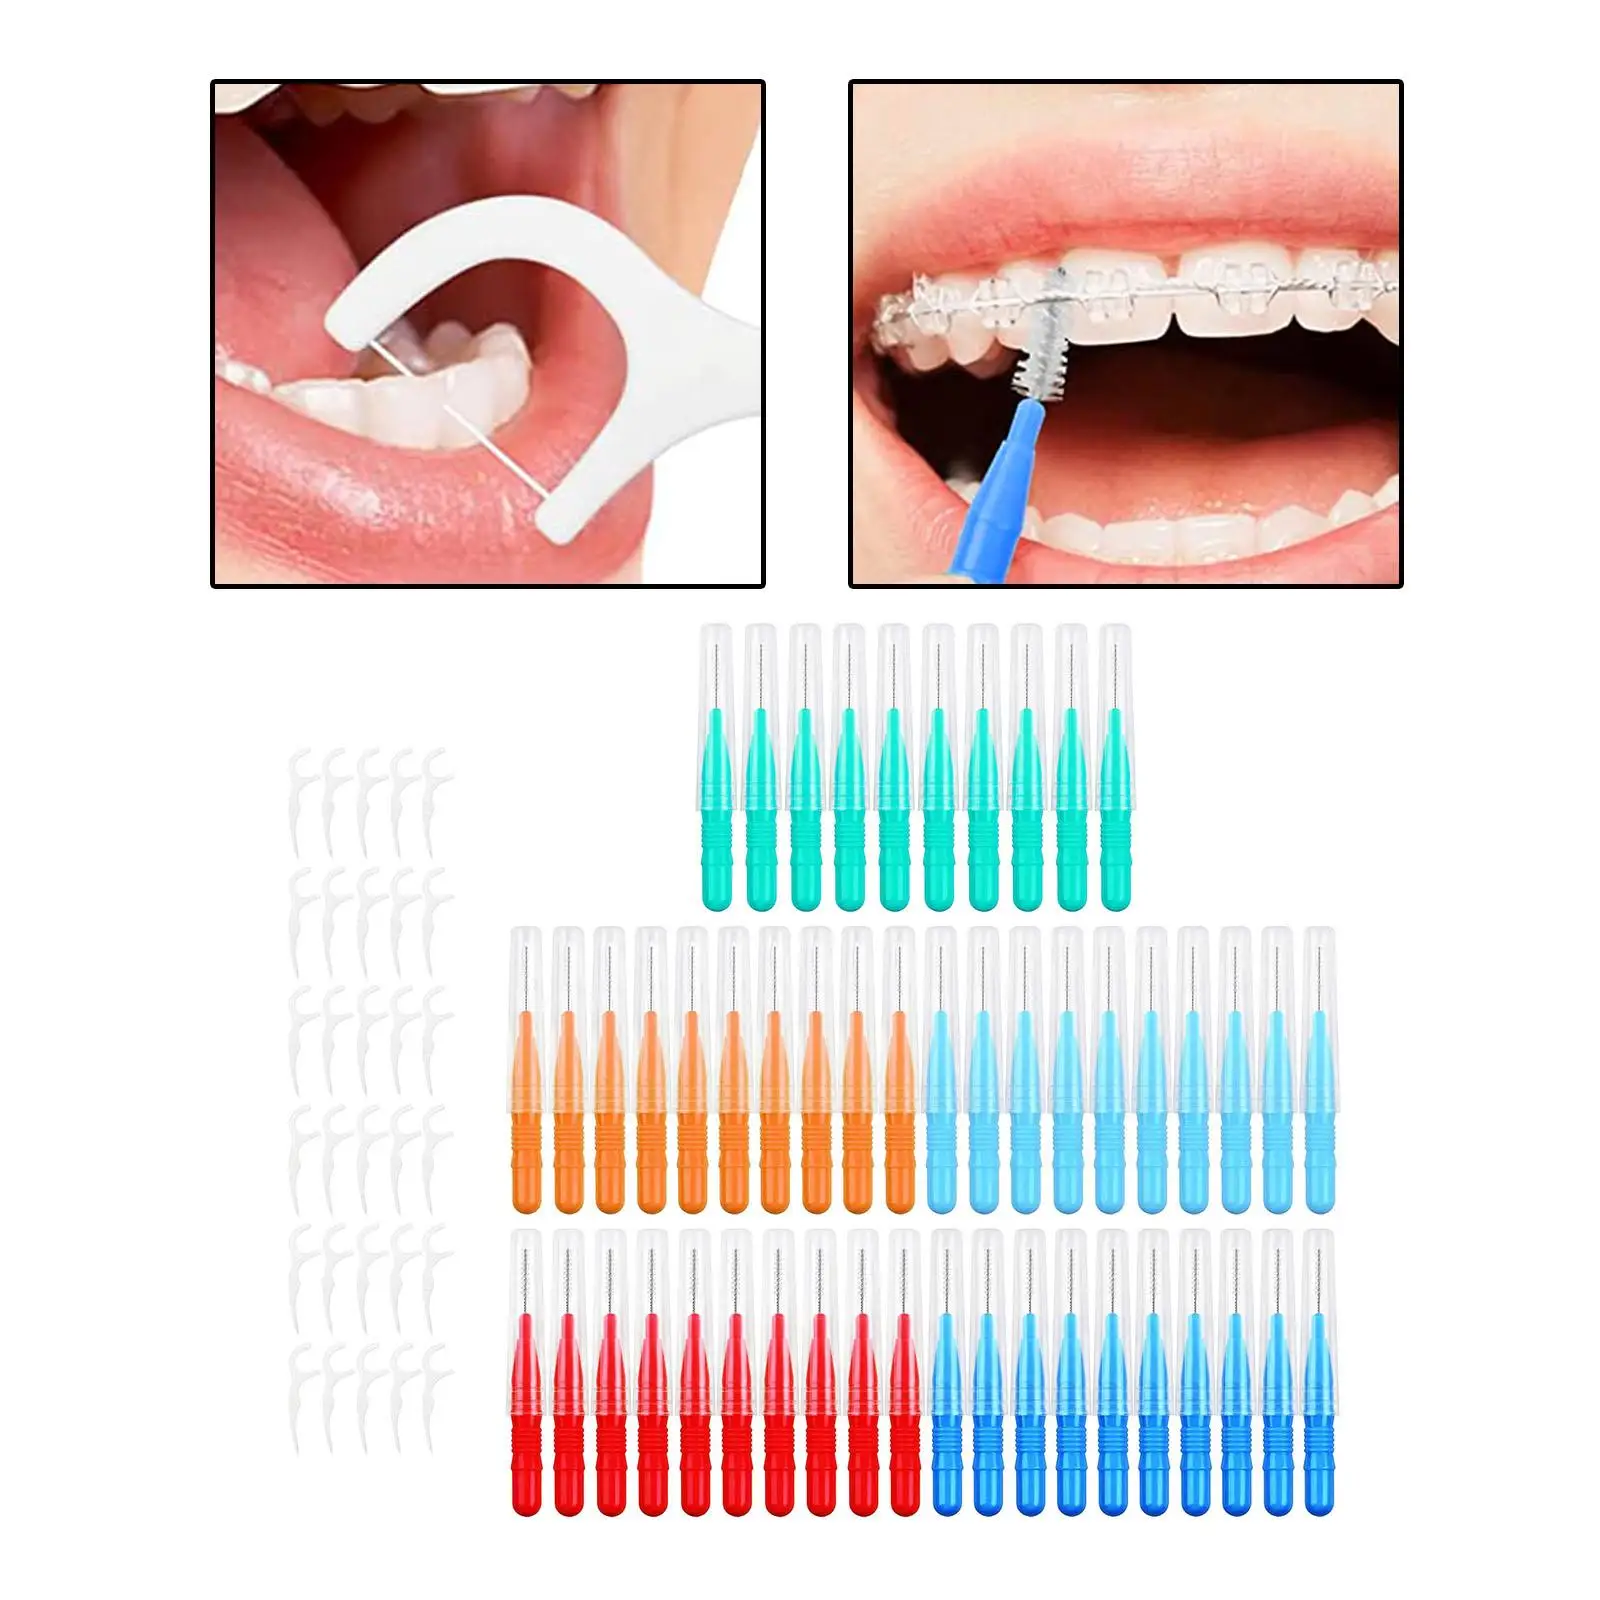 50Pcs Interdental Brushes 2mm 2.5mm 3mm for Cleaning Gaps Between Teeth 30x Floss Flossers Teeth Cleaners 